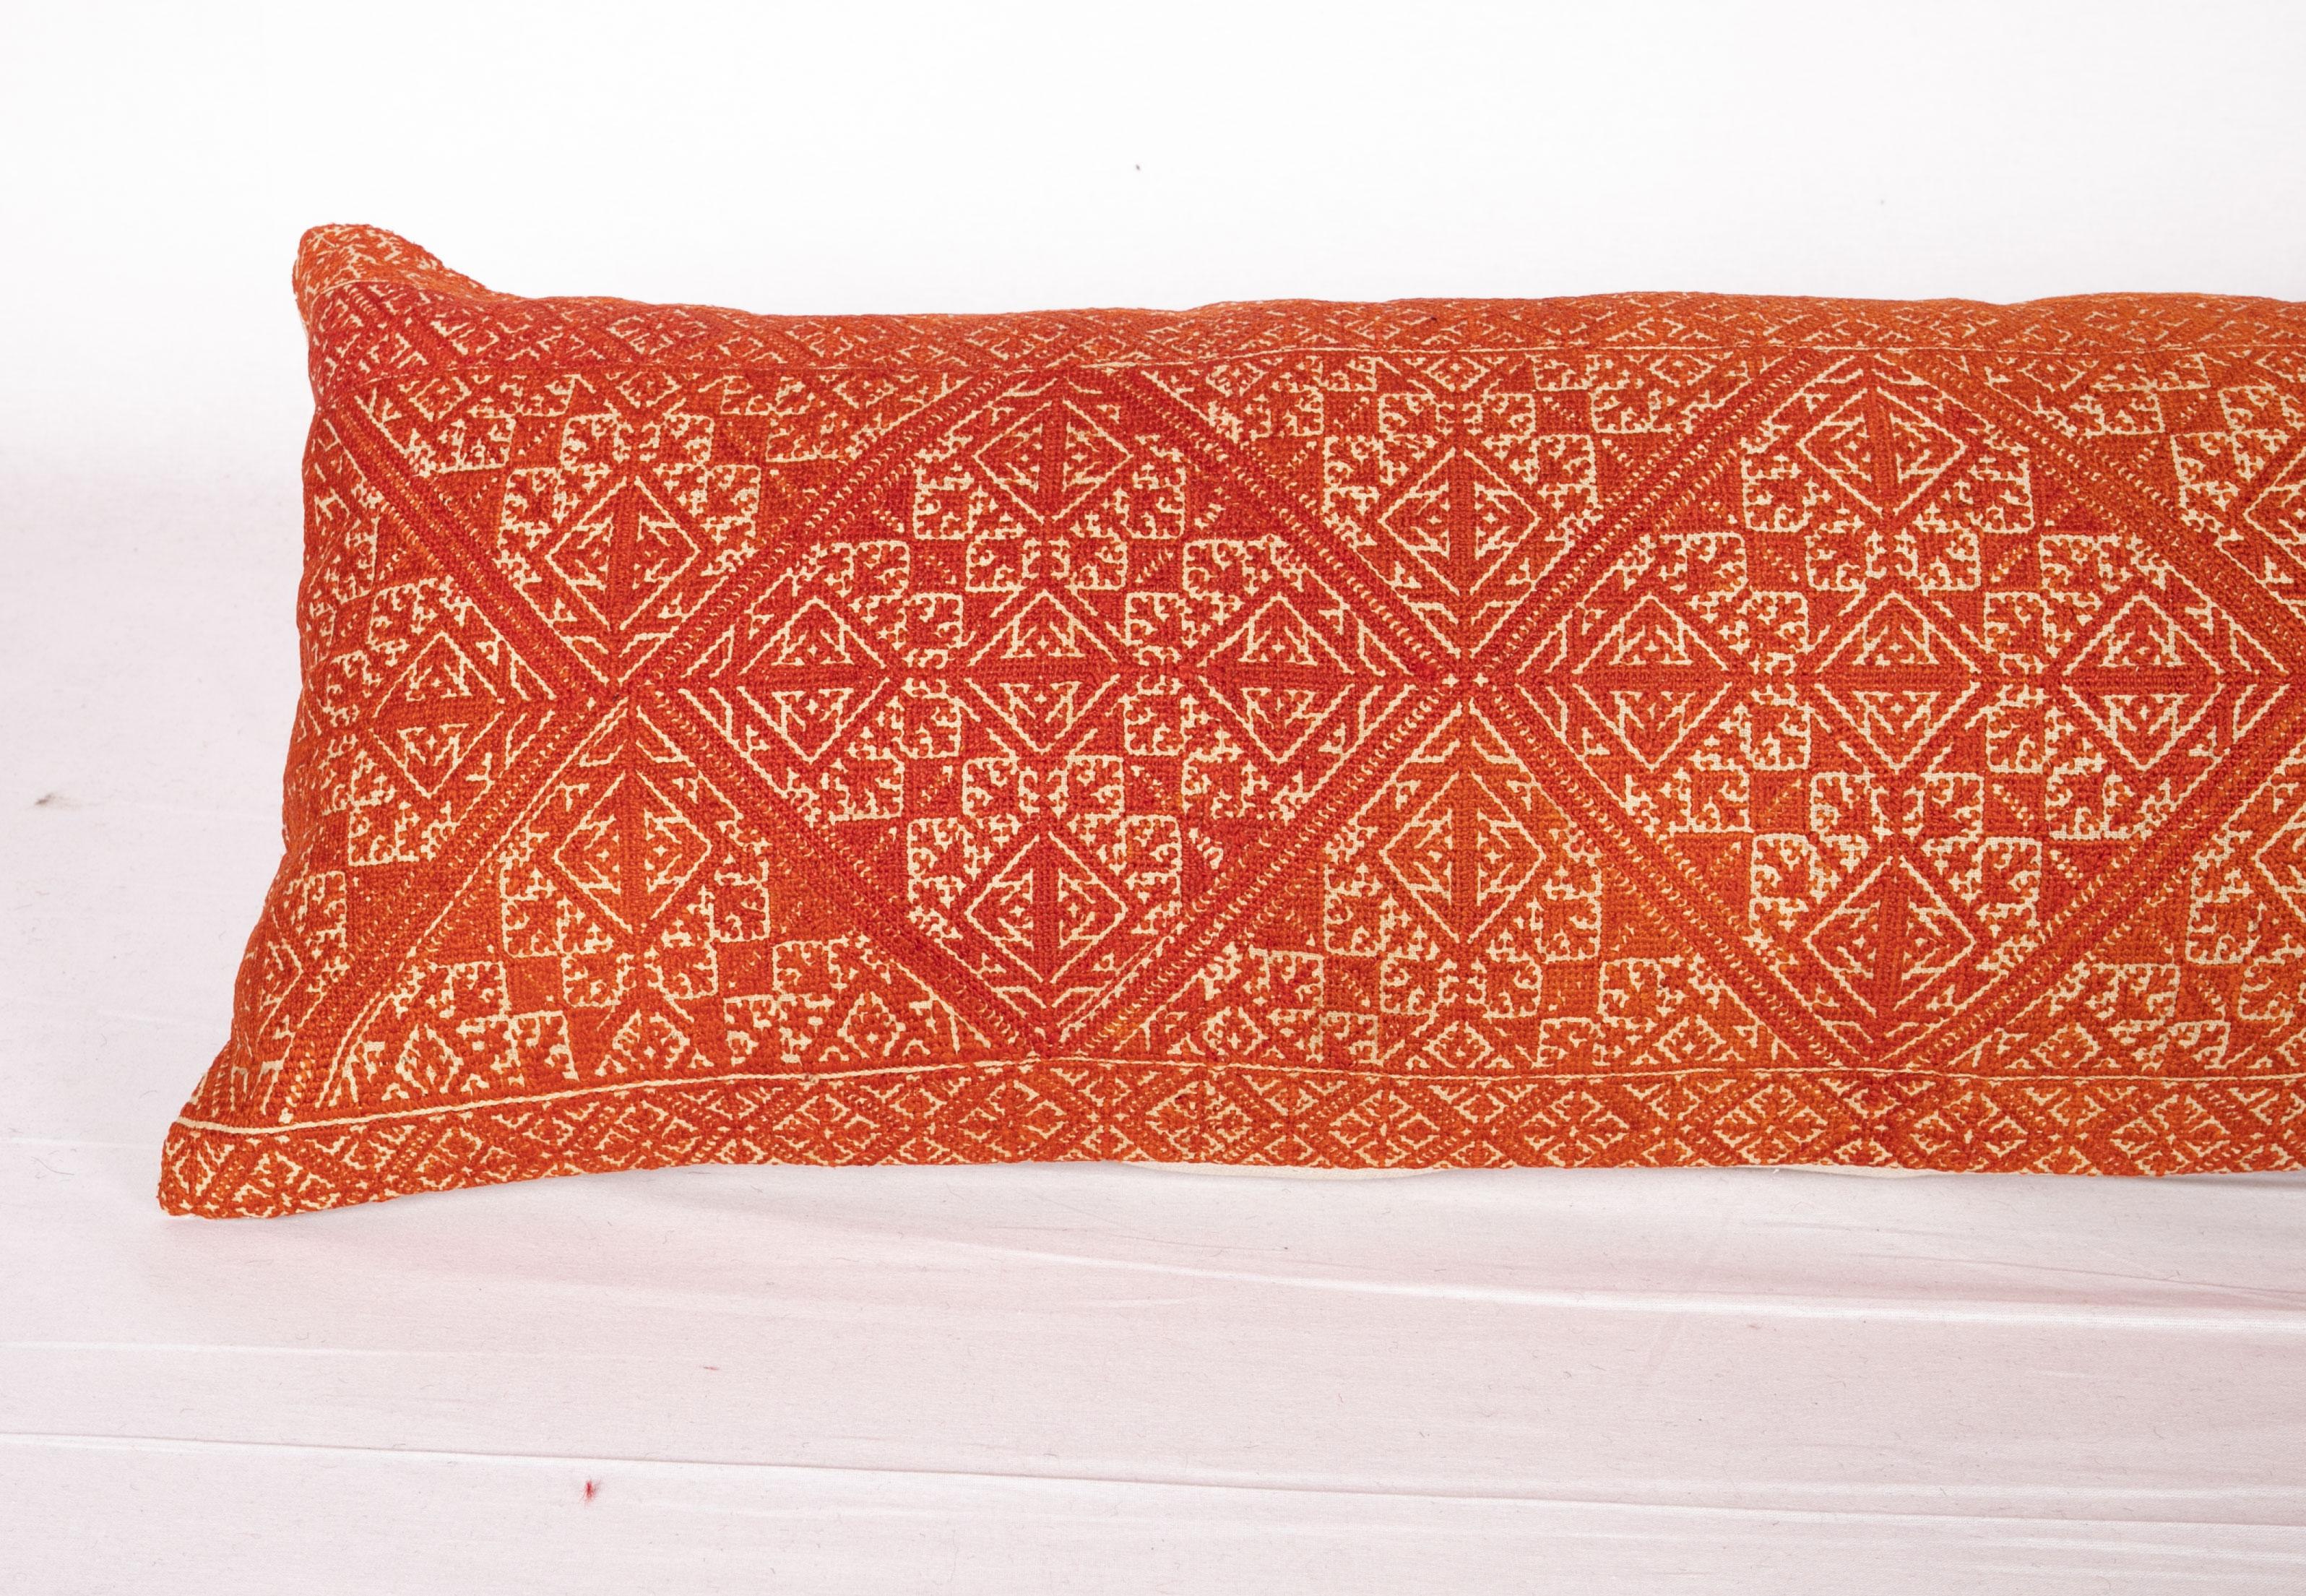 Suzani Antique Moroccan Fez Embroidery Pillow Case, Early 20th Century